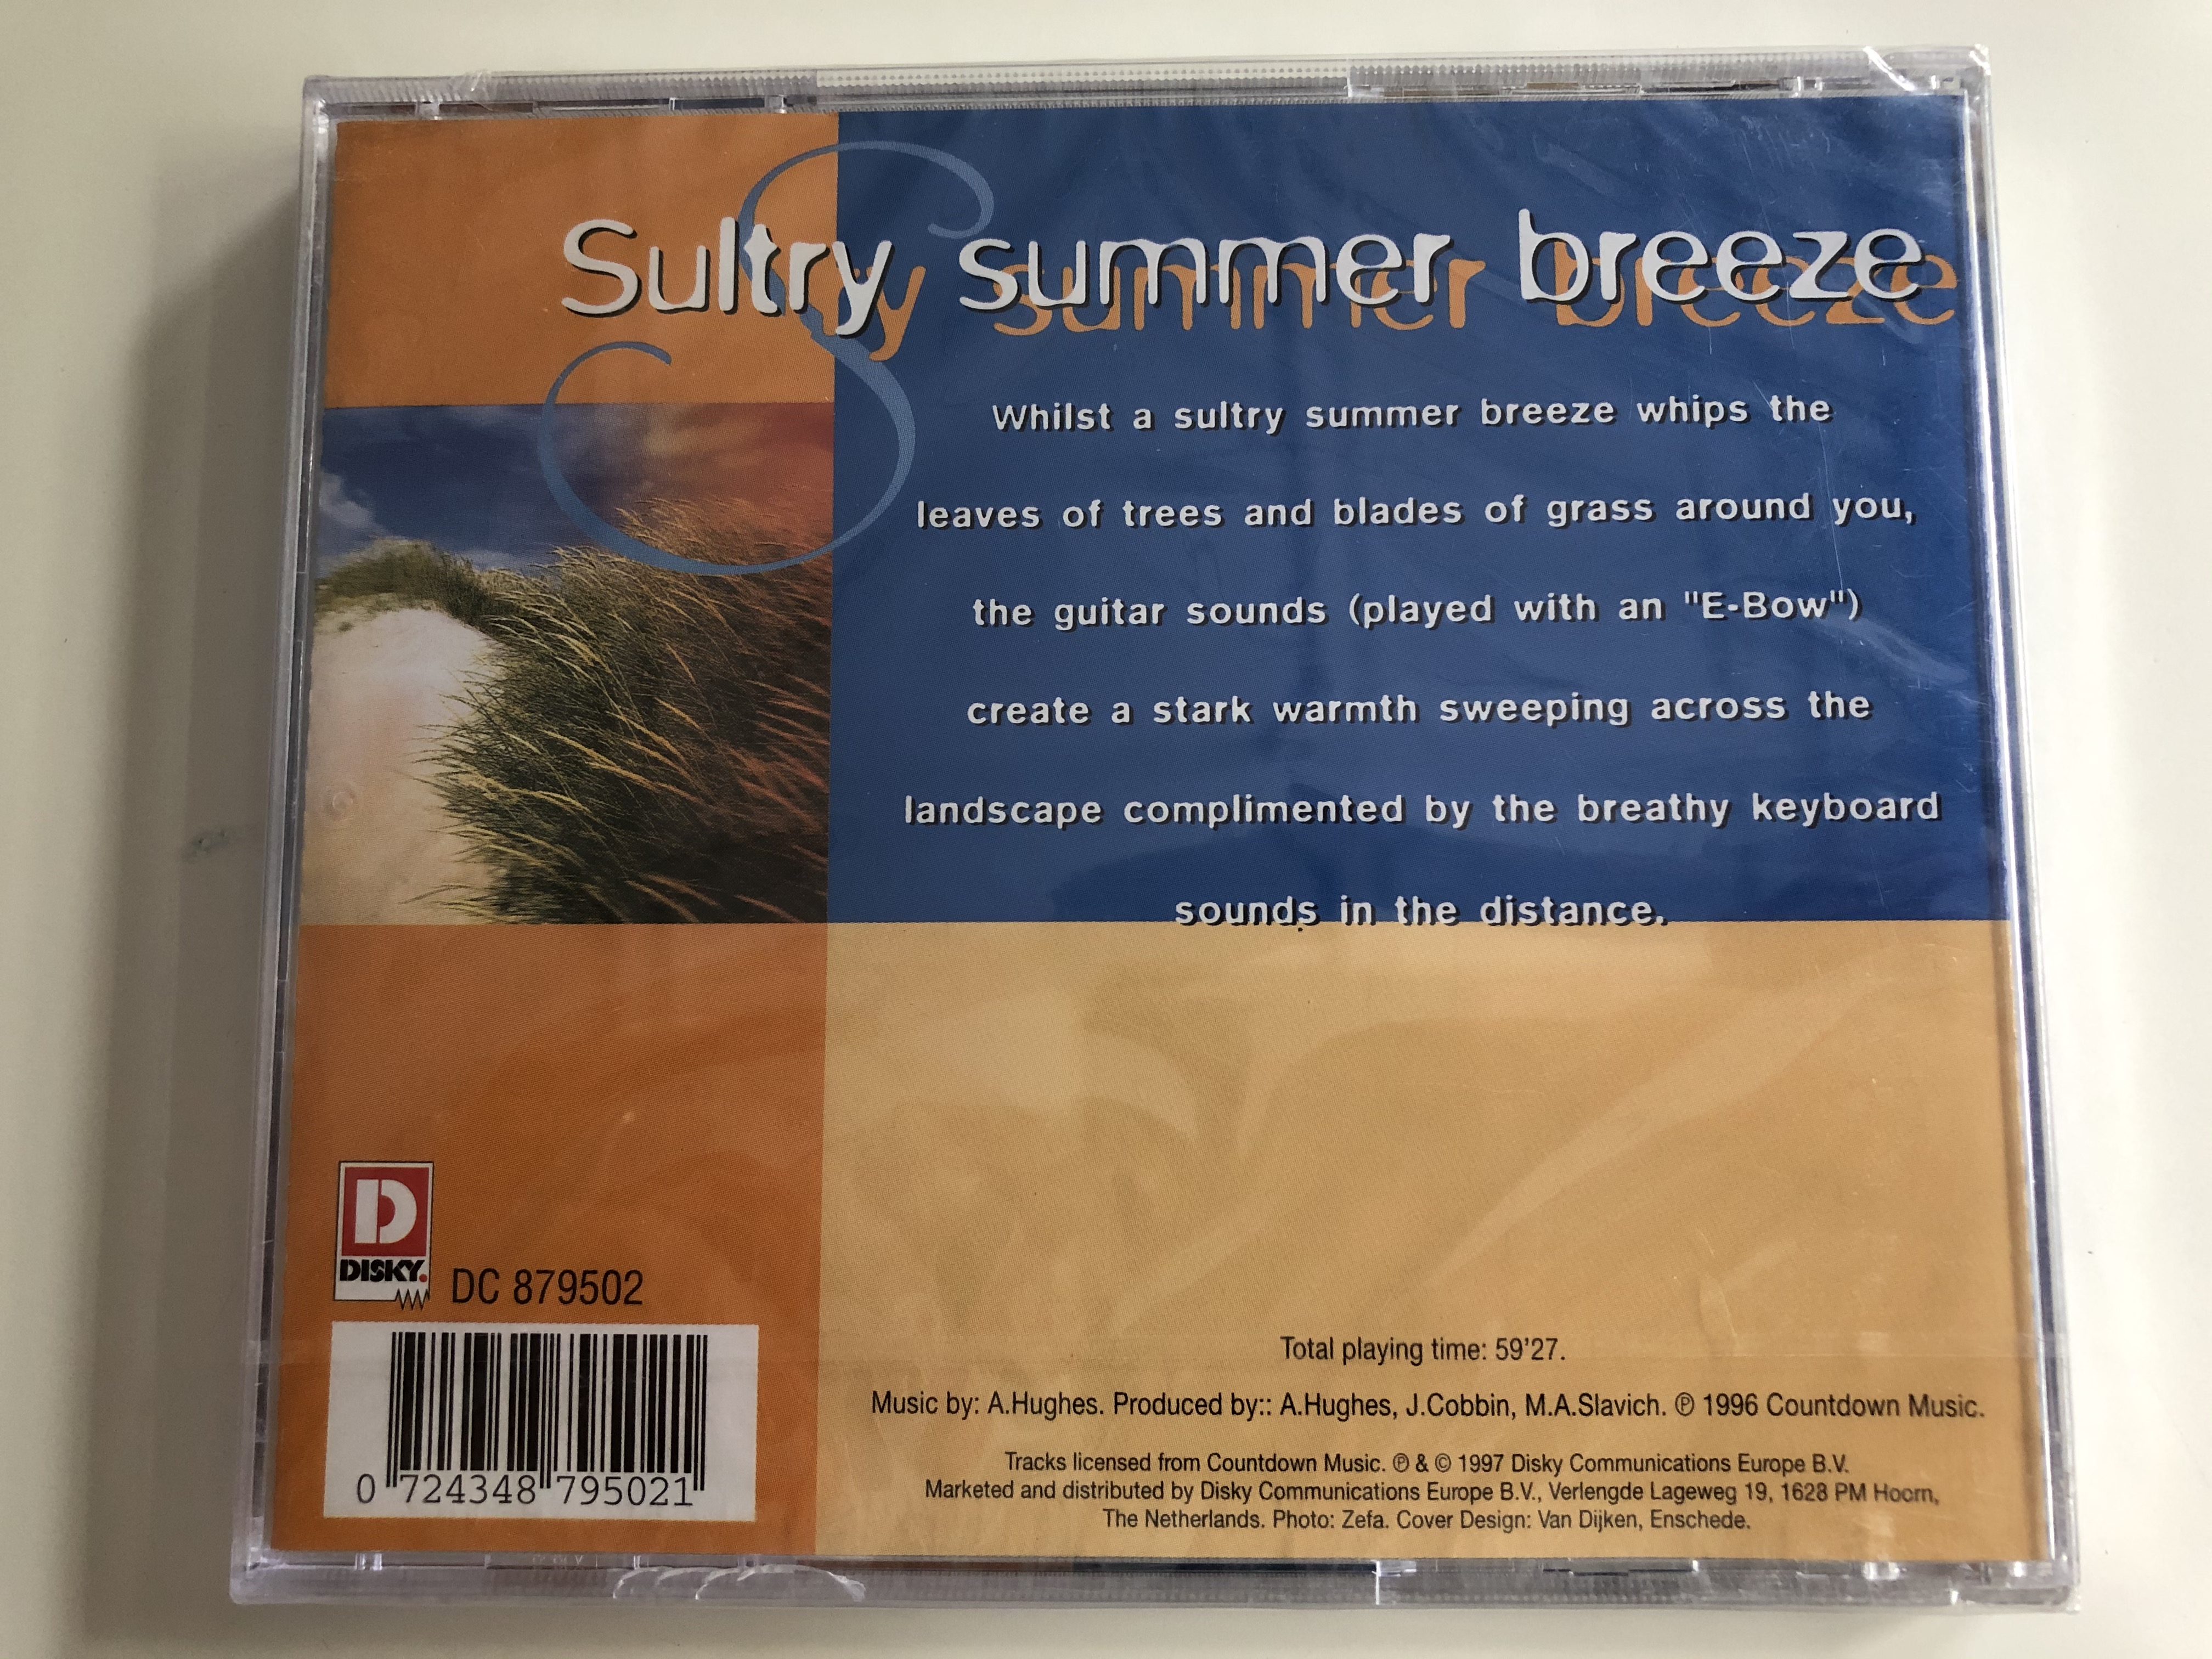 sultry-summer-breeze-the-beauty-of-music-blended-with-the-sensual-sounds-of-nature-to-give-the-ultimate-experience-of-tranquility-and-harmony-disky-audio-cd-1997-dc-879502-2-.jpg